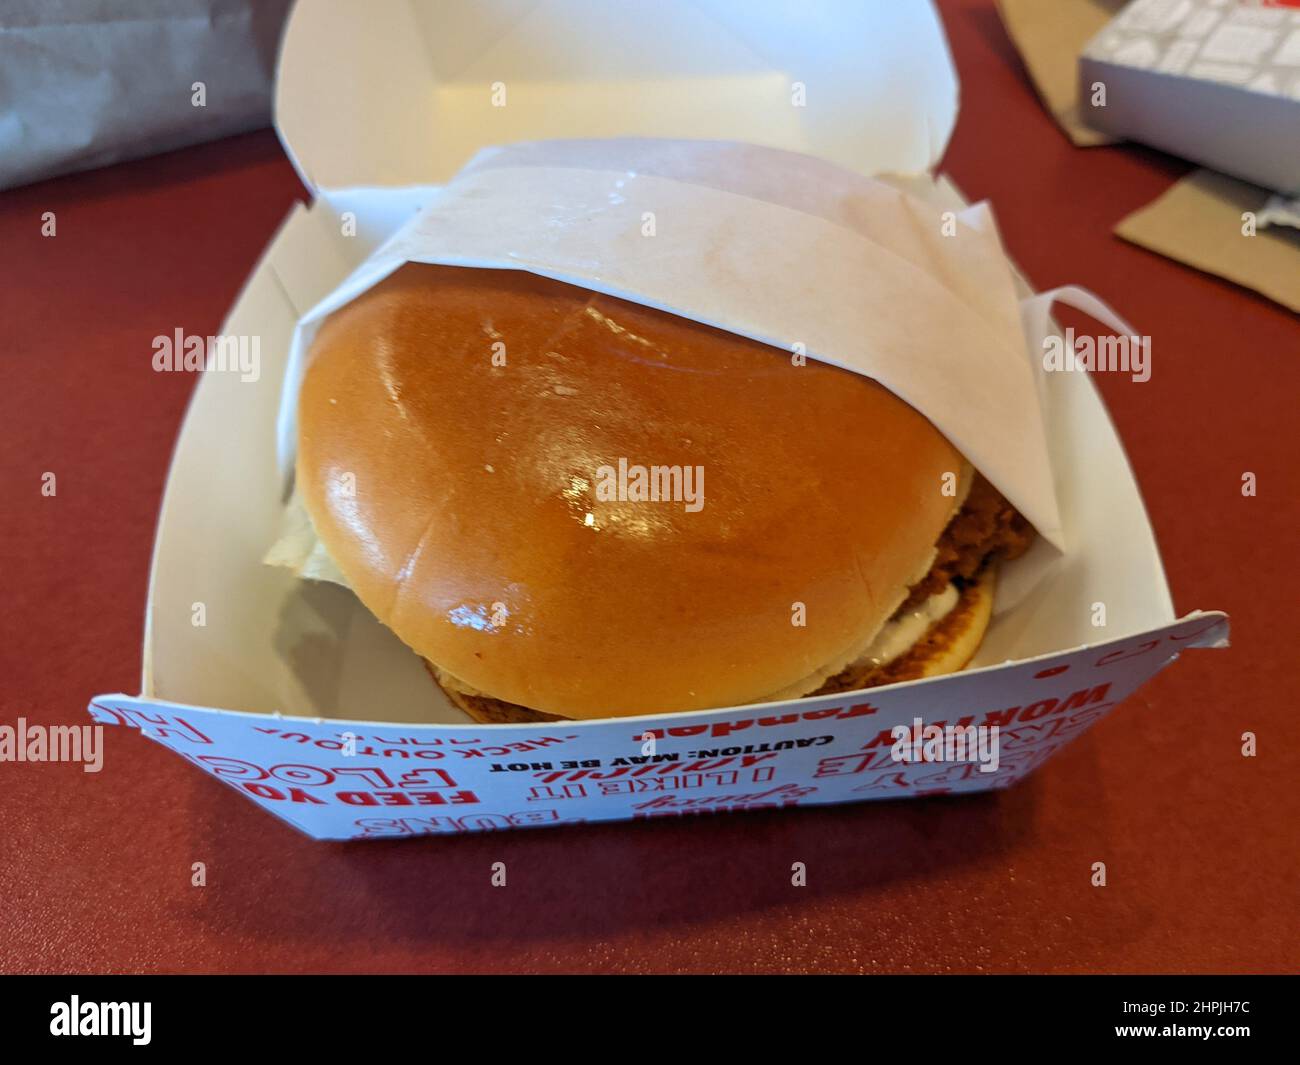 Burger in a fast food restaurant (Spicy Cluck Deluxe at Jack in the Box) Stock Photo